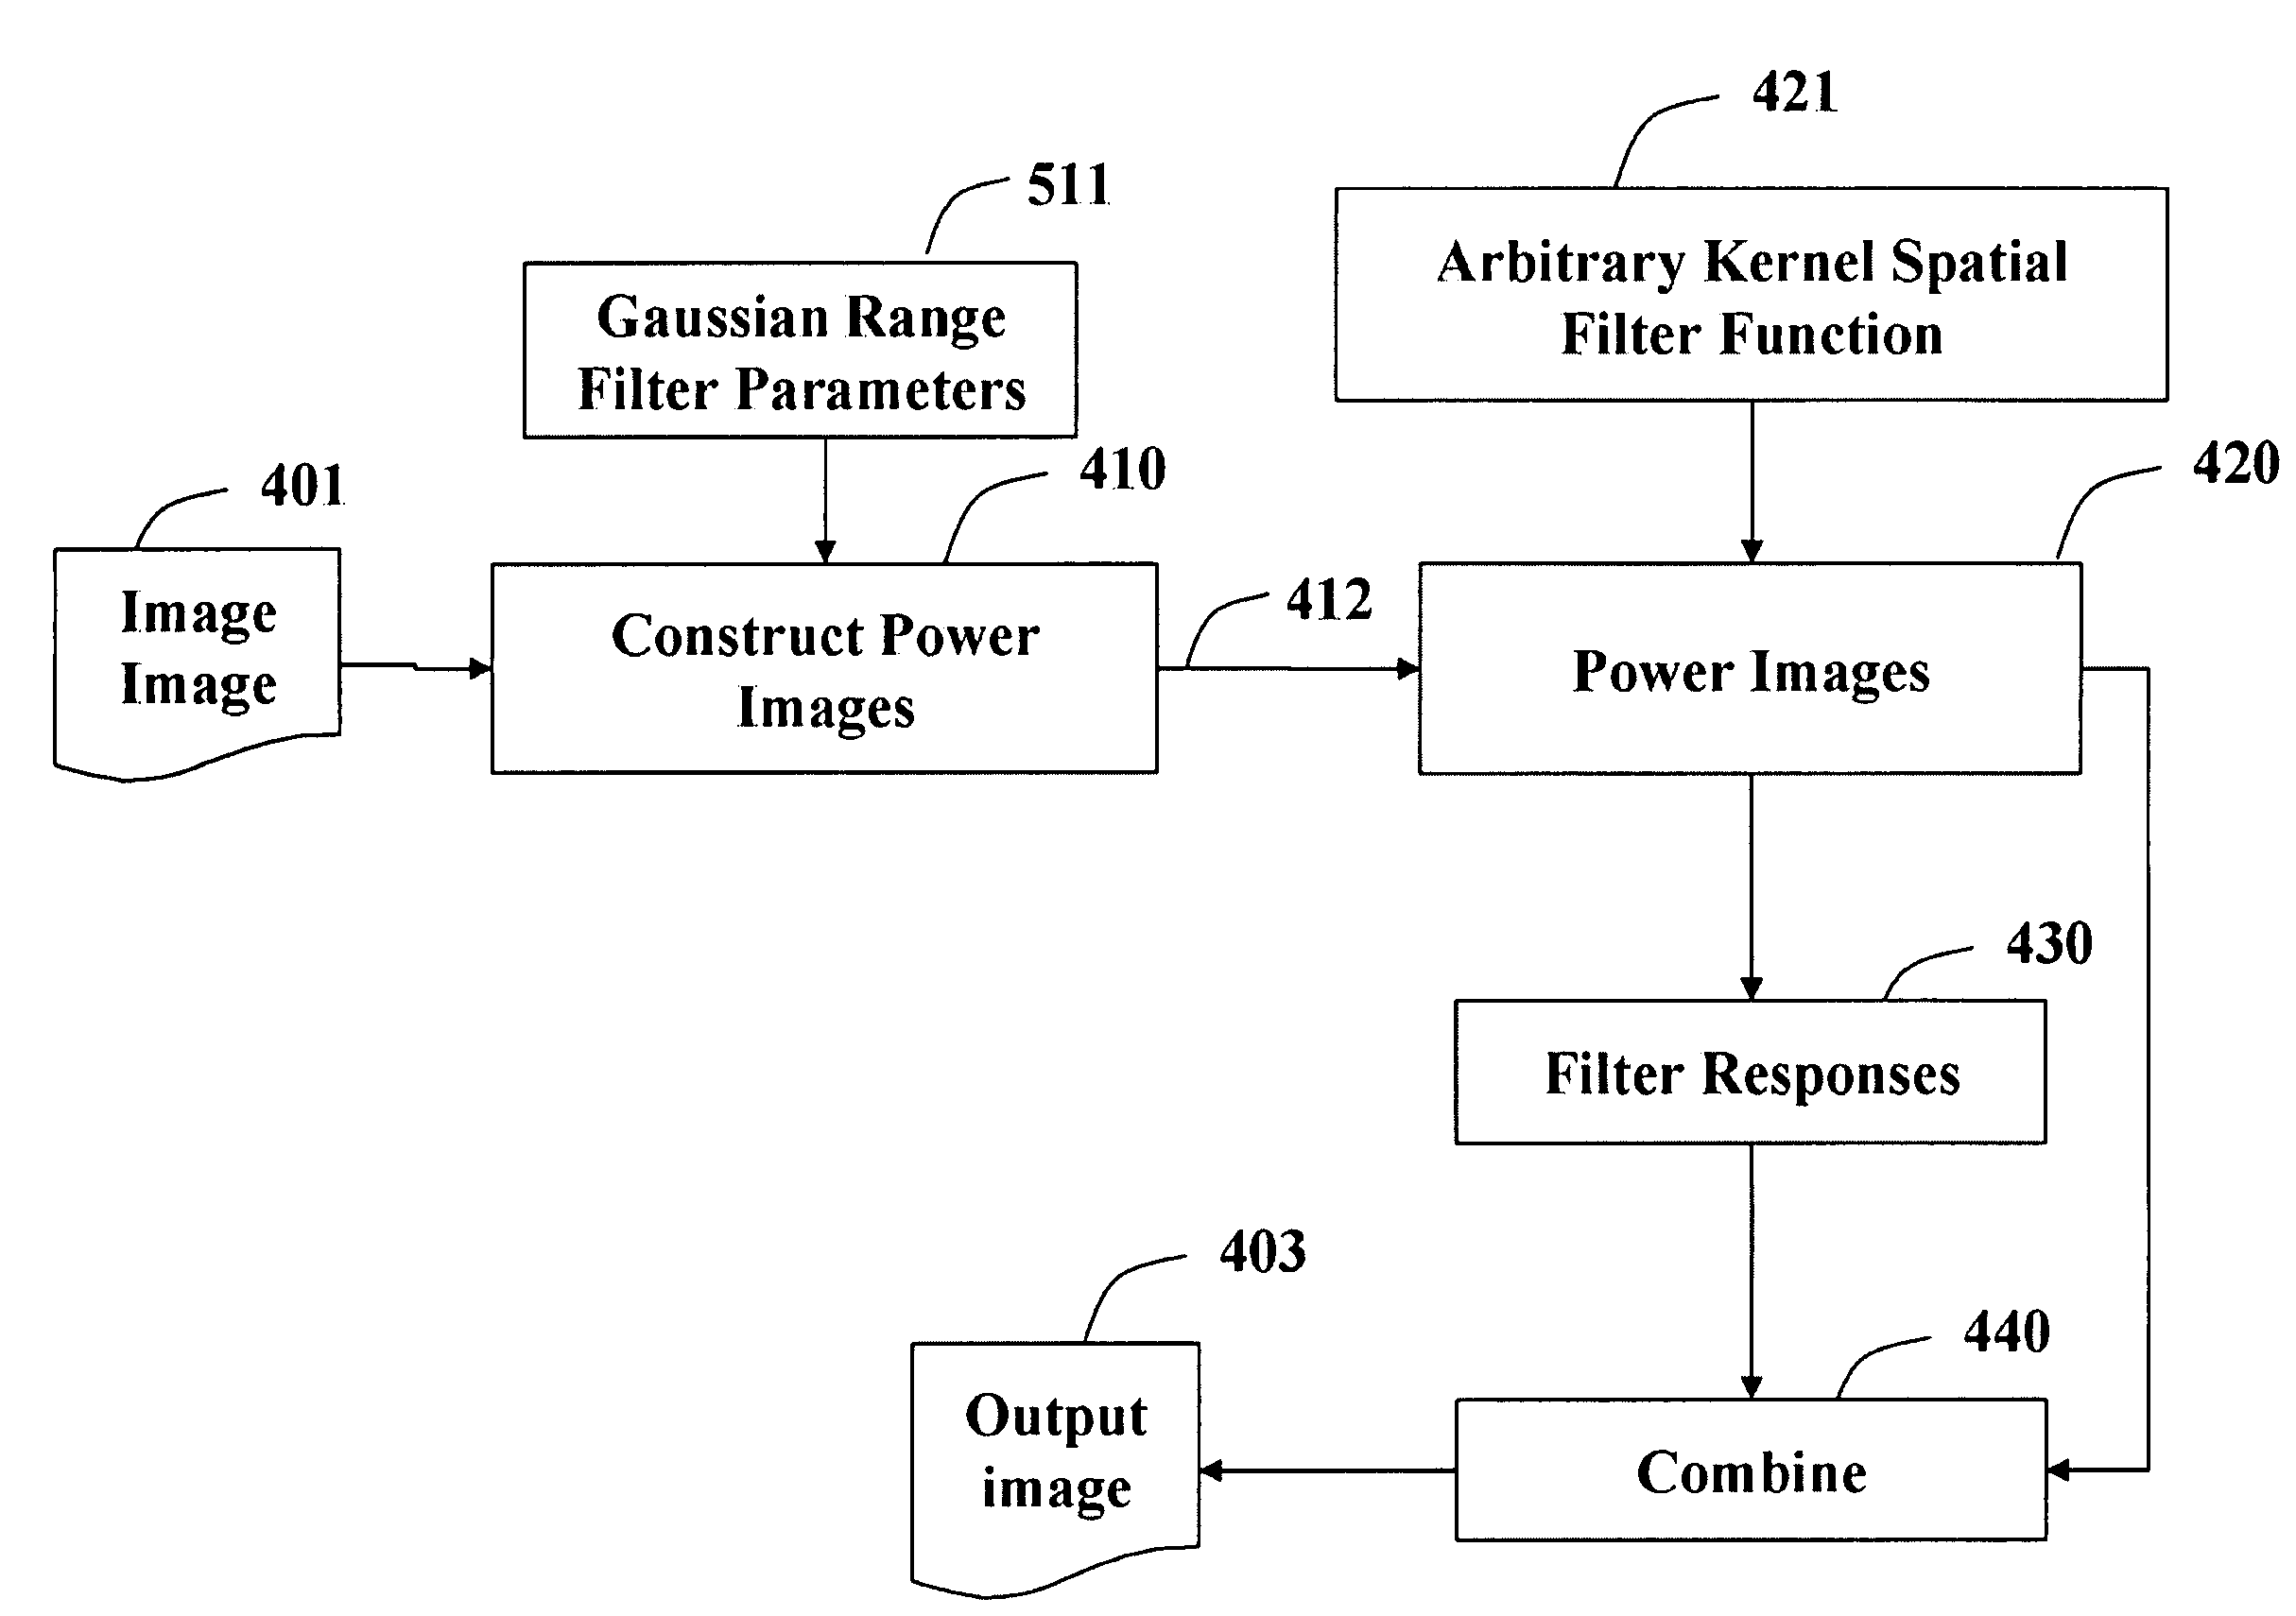 Method for Filtering of Images with Bilateral Filters and Power Images